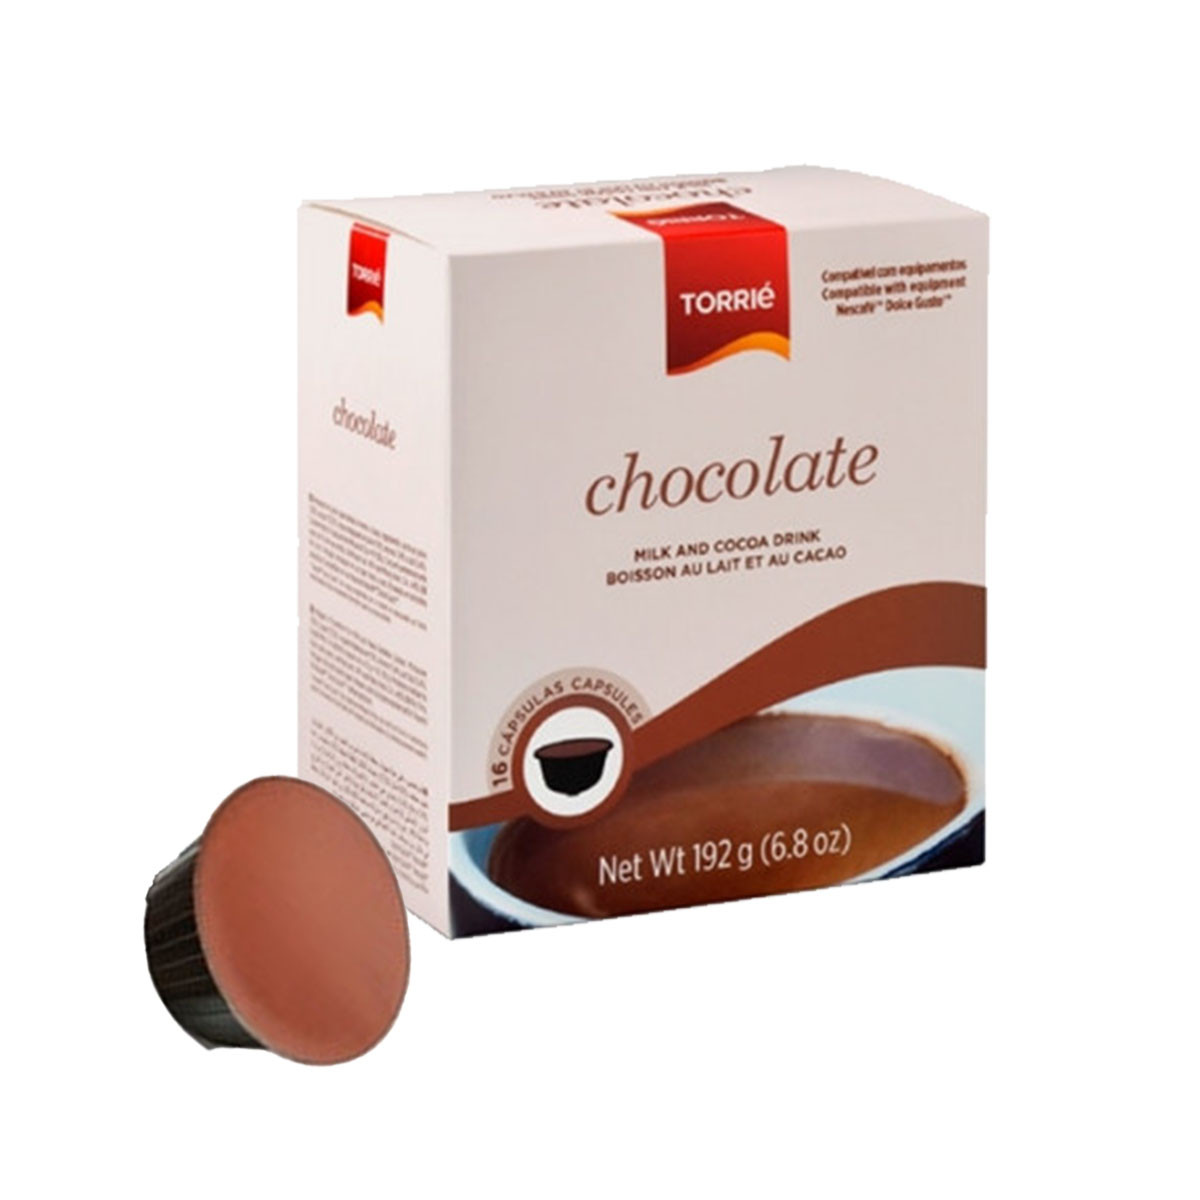 Chocolat chaud gourmand - Capsule compatible Dolce Gusto x16